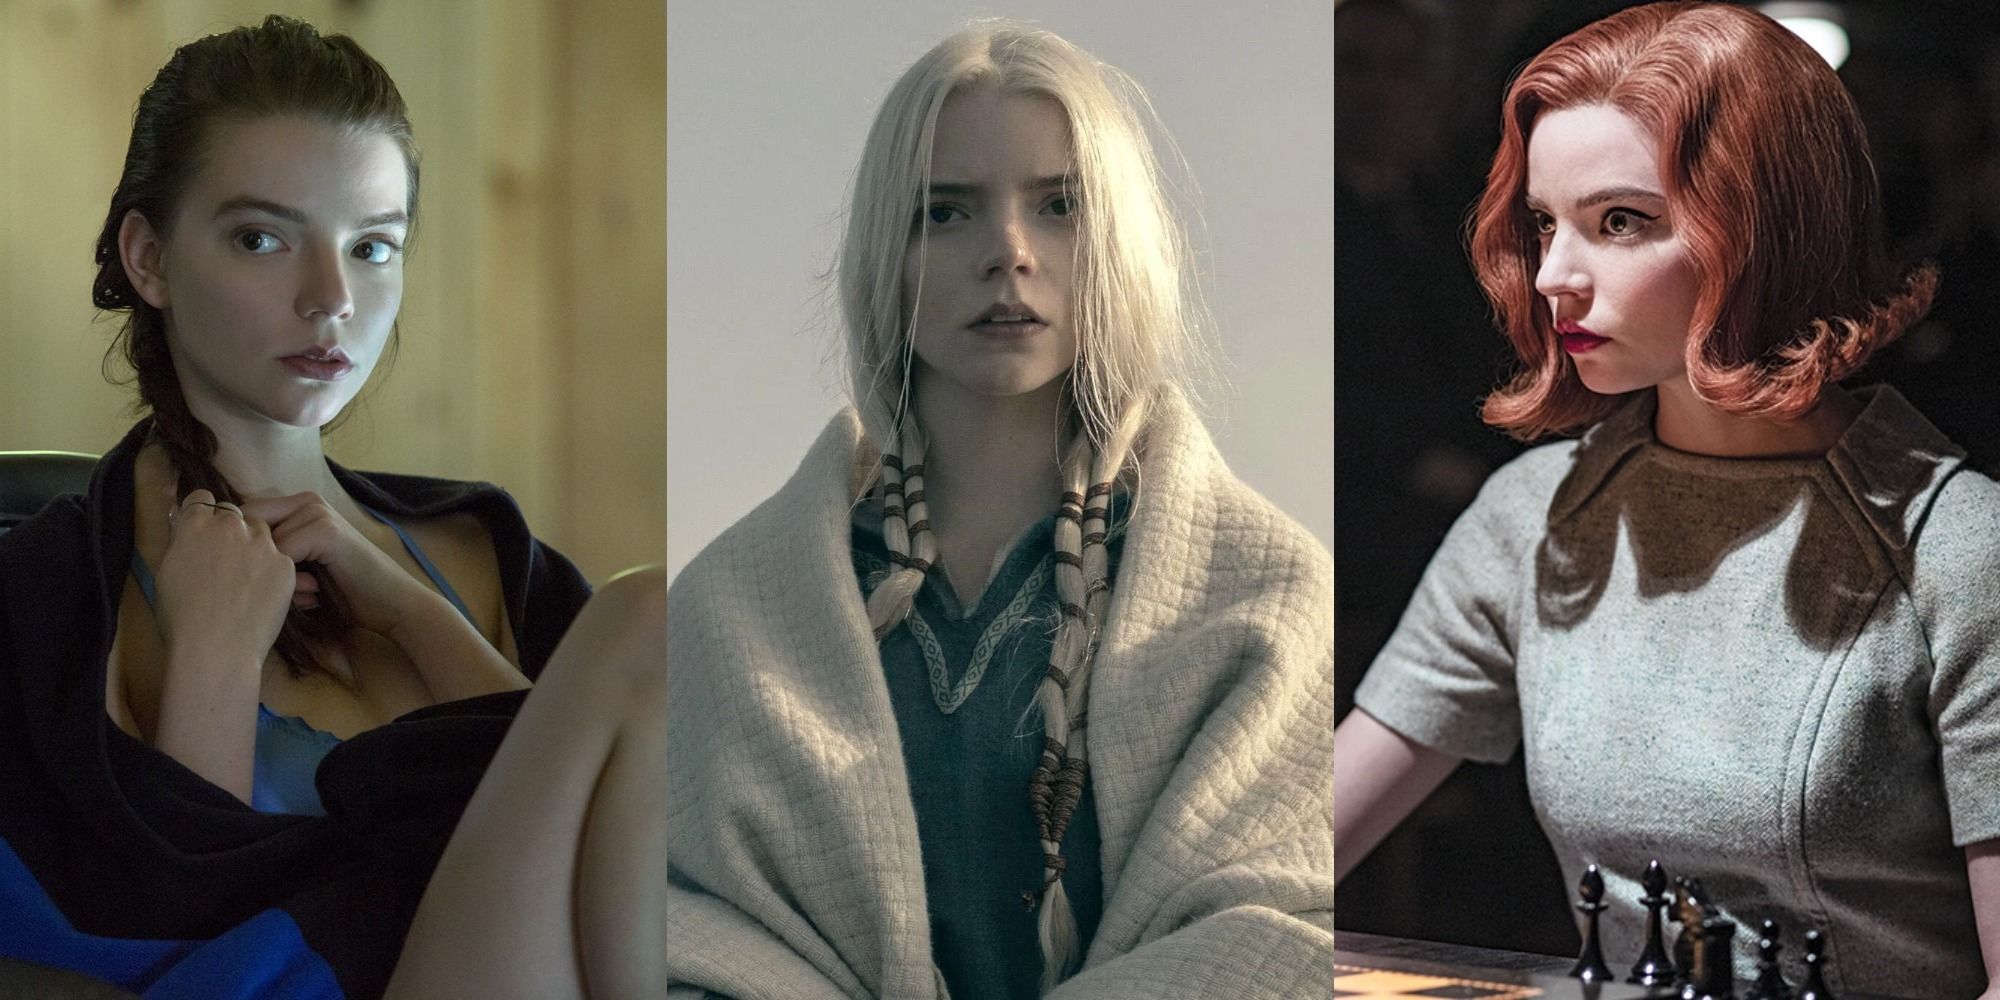 Anya Taylor-Joy's 11 Best Film & TV Roles, According To Rotten Tomatoes